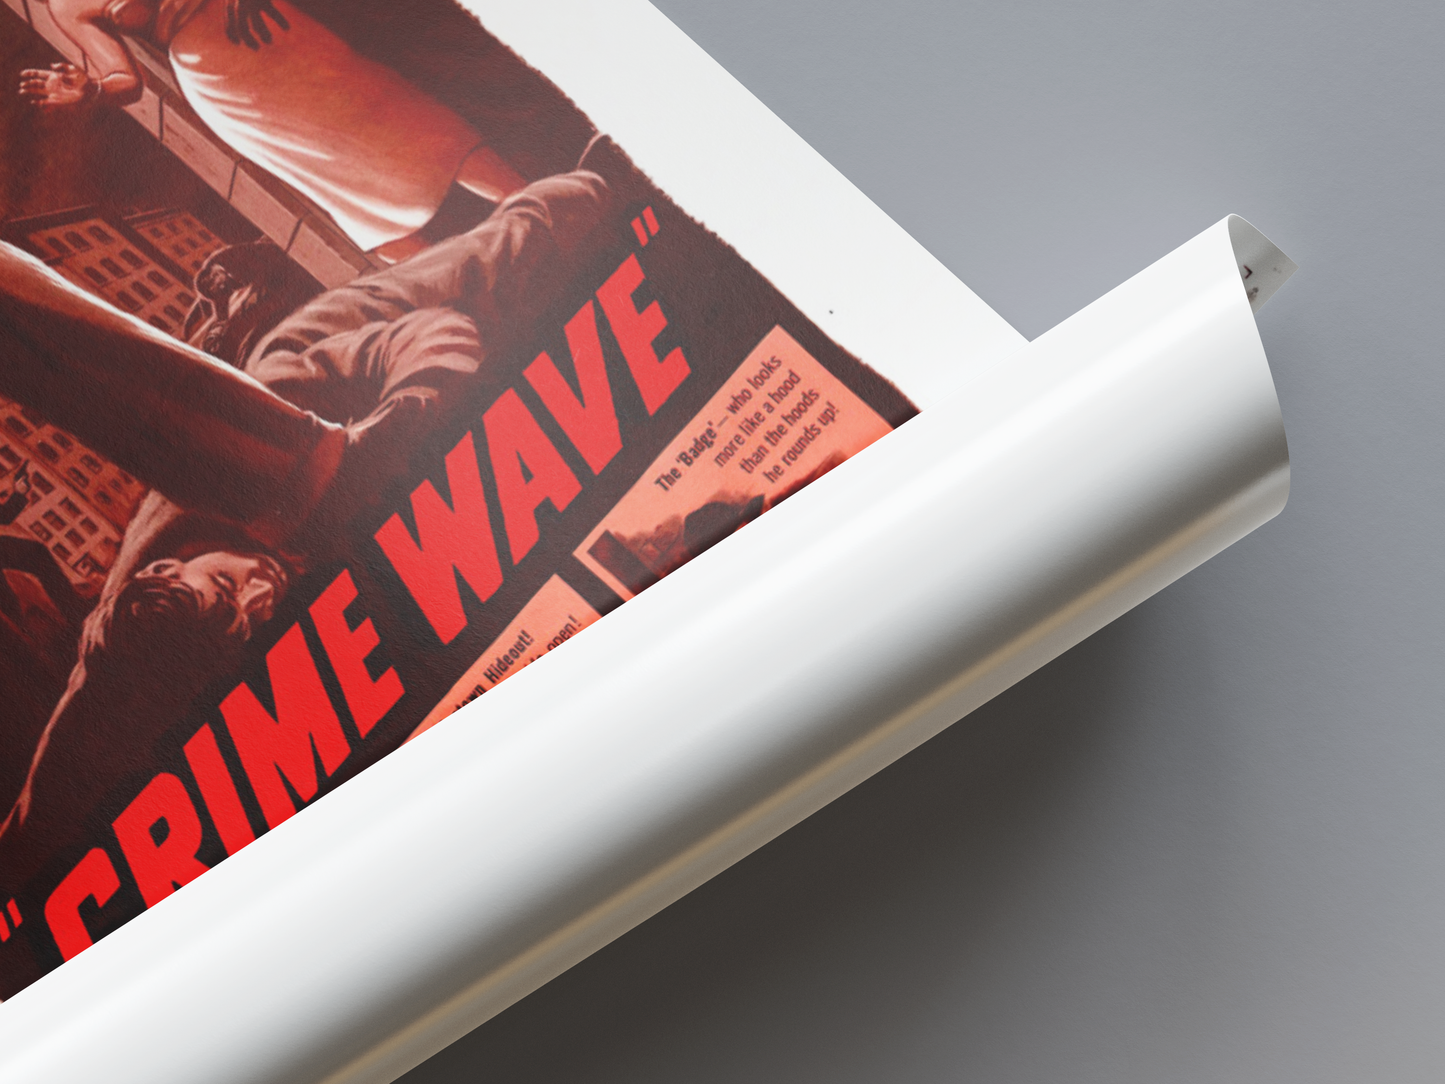 Crime Wave (1954) Movie Poster displayed in interior setting